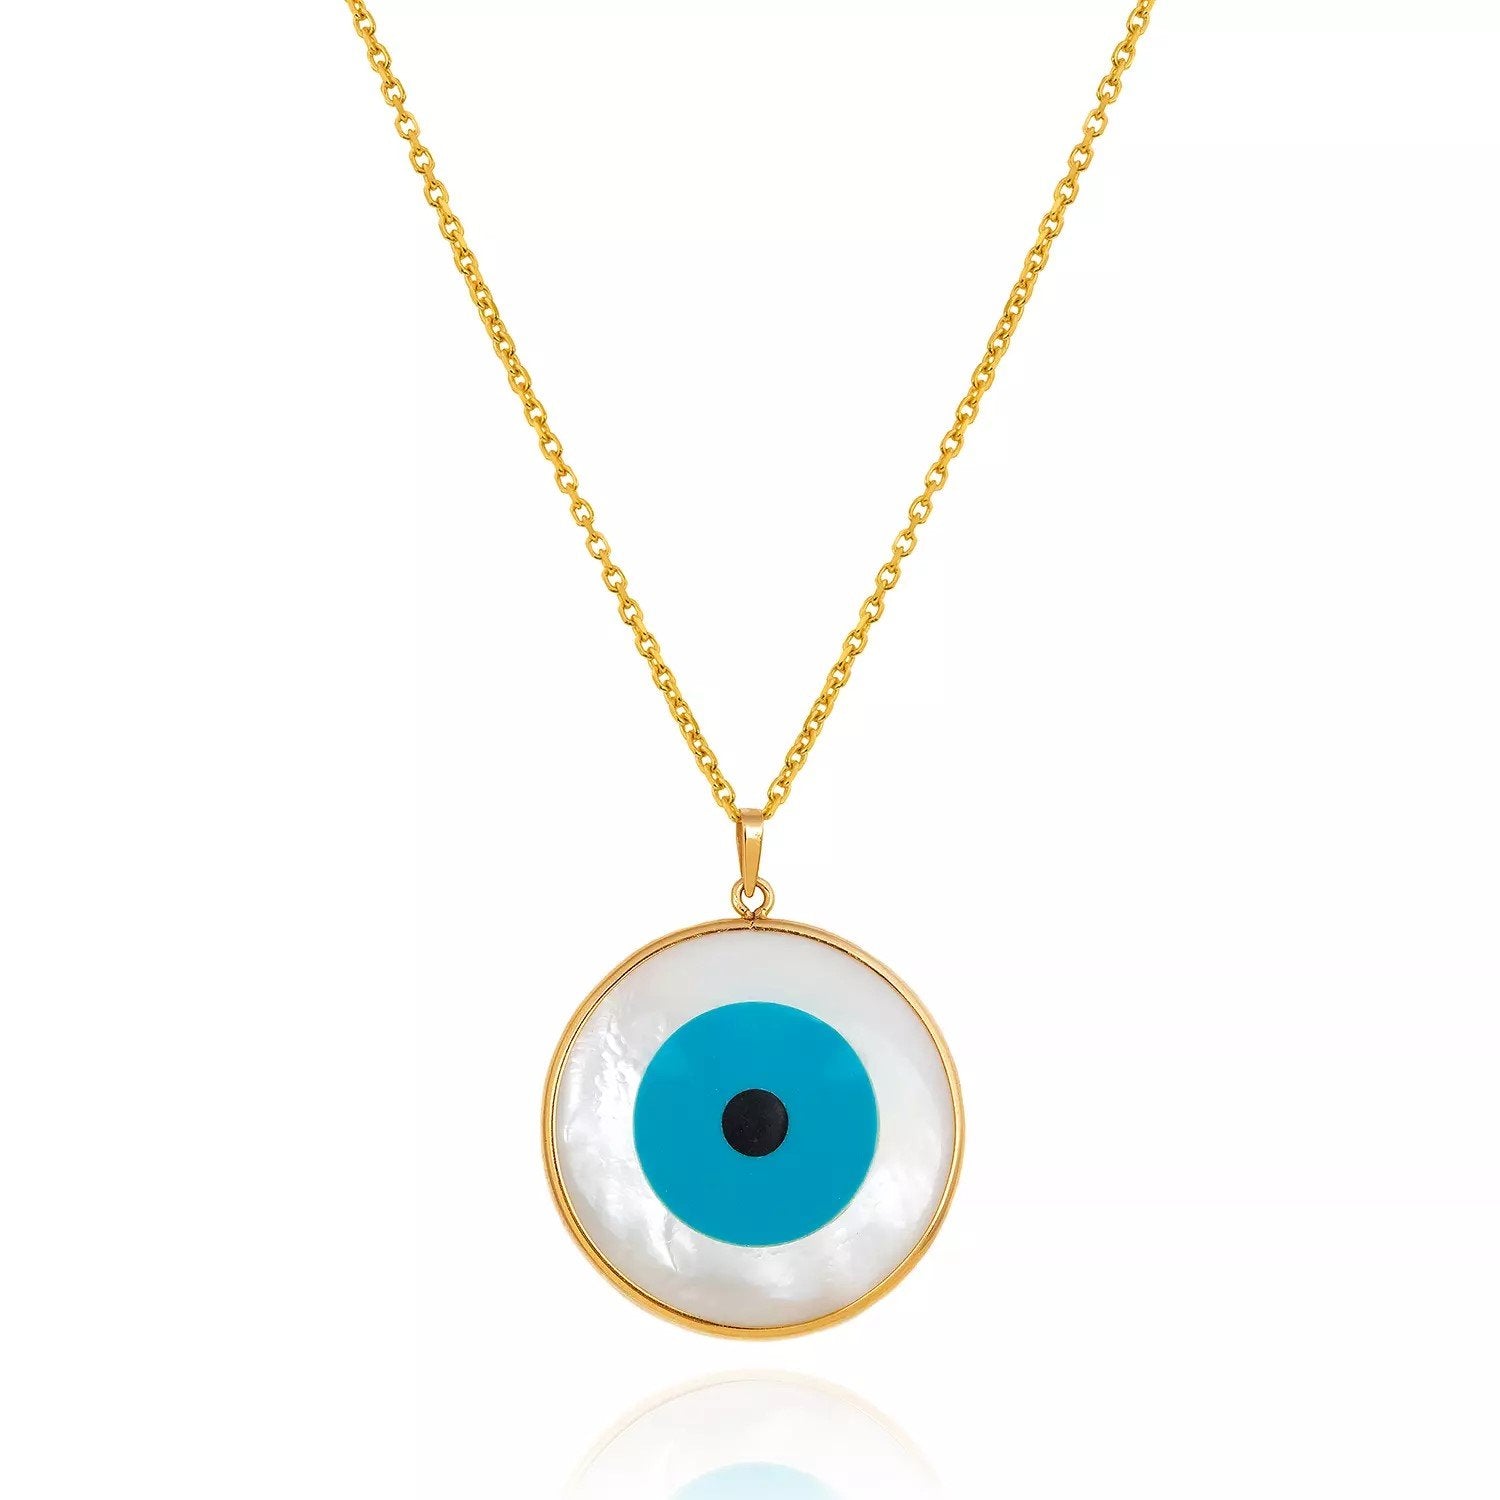 Yellow Gold Big Evil Eye Pendent, 18k, 1.4gr, Chain is not Included.